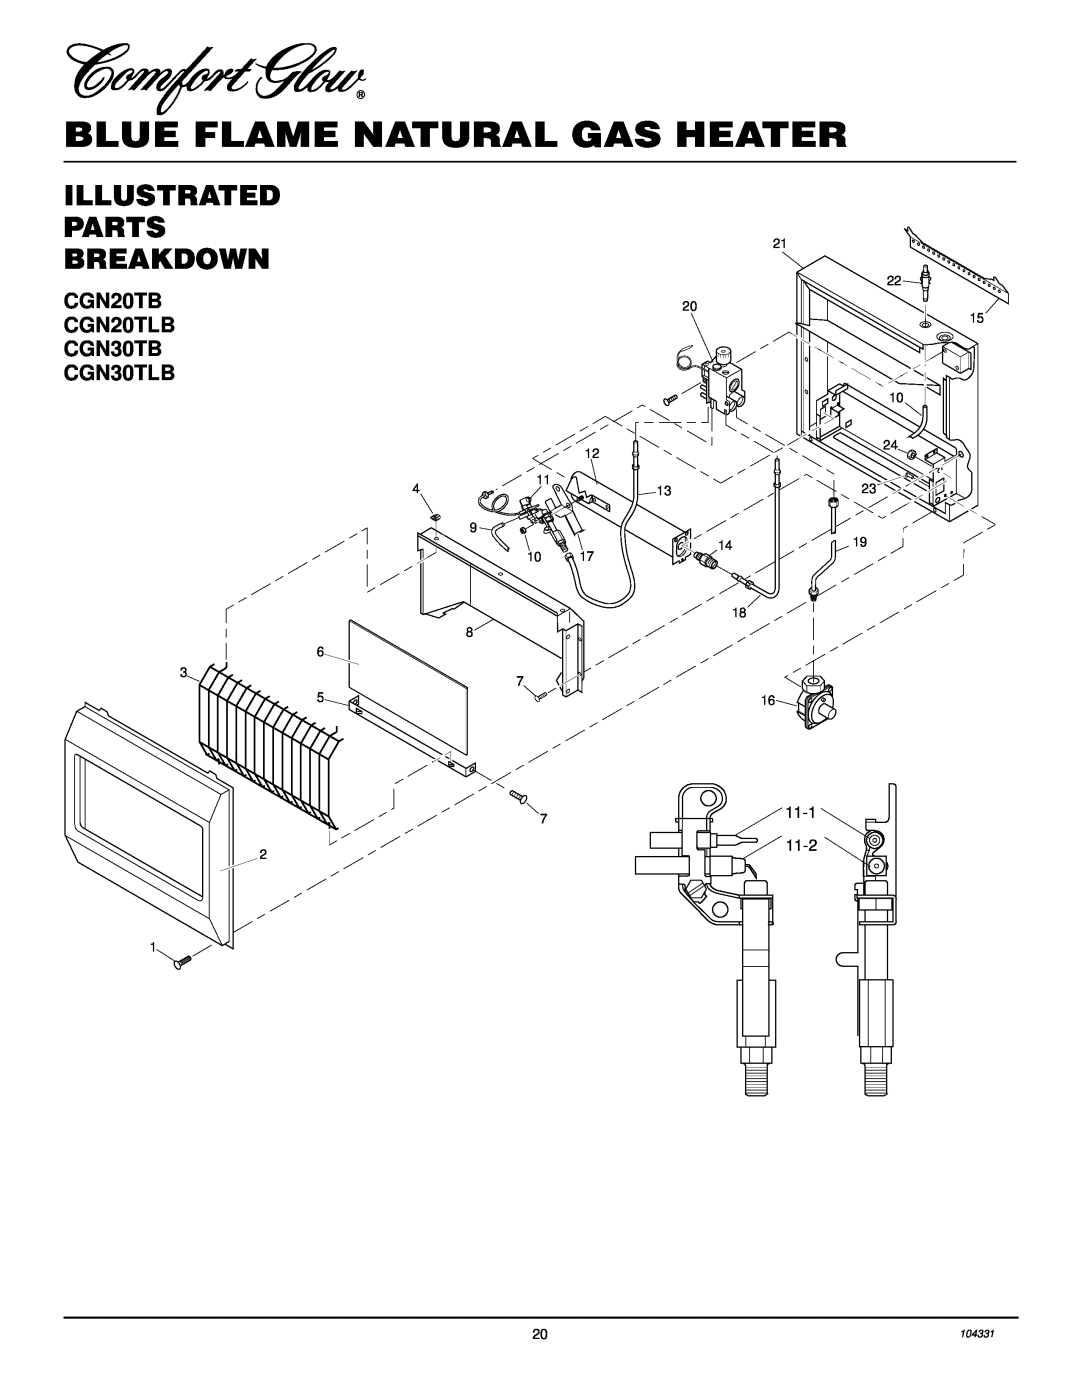 Desa installation manual Illustrated Parts Breakdown, CGN20TB CGN20TLB CGN30TB CGN30TLB, Blue Flame Natural Gas Heater 